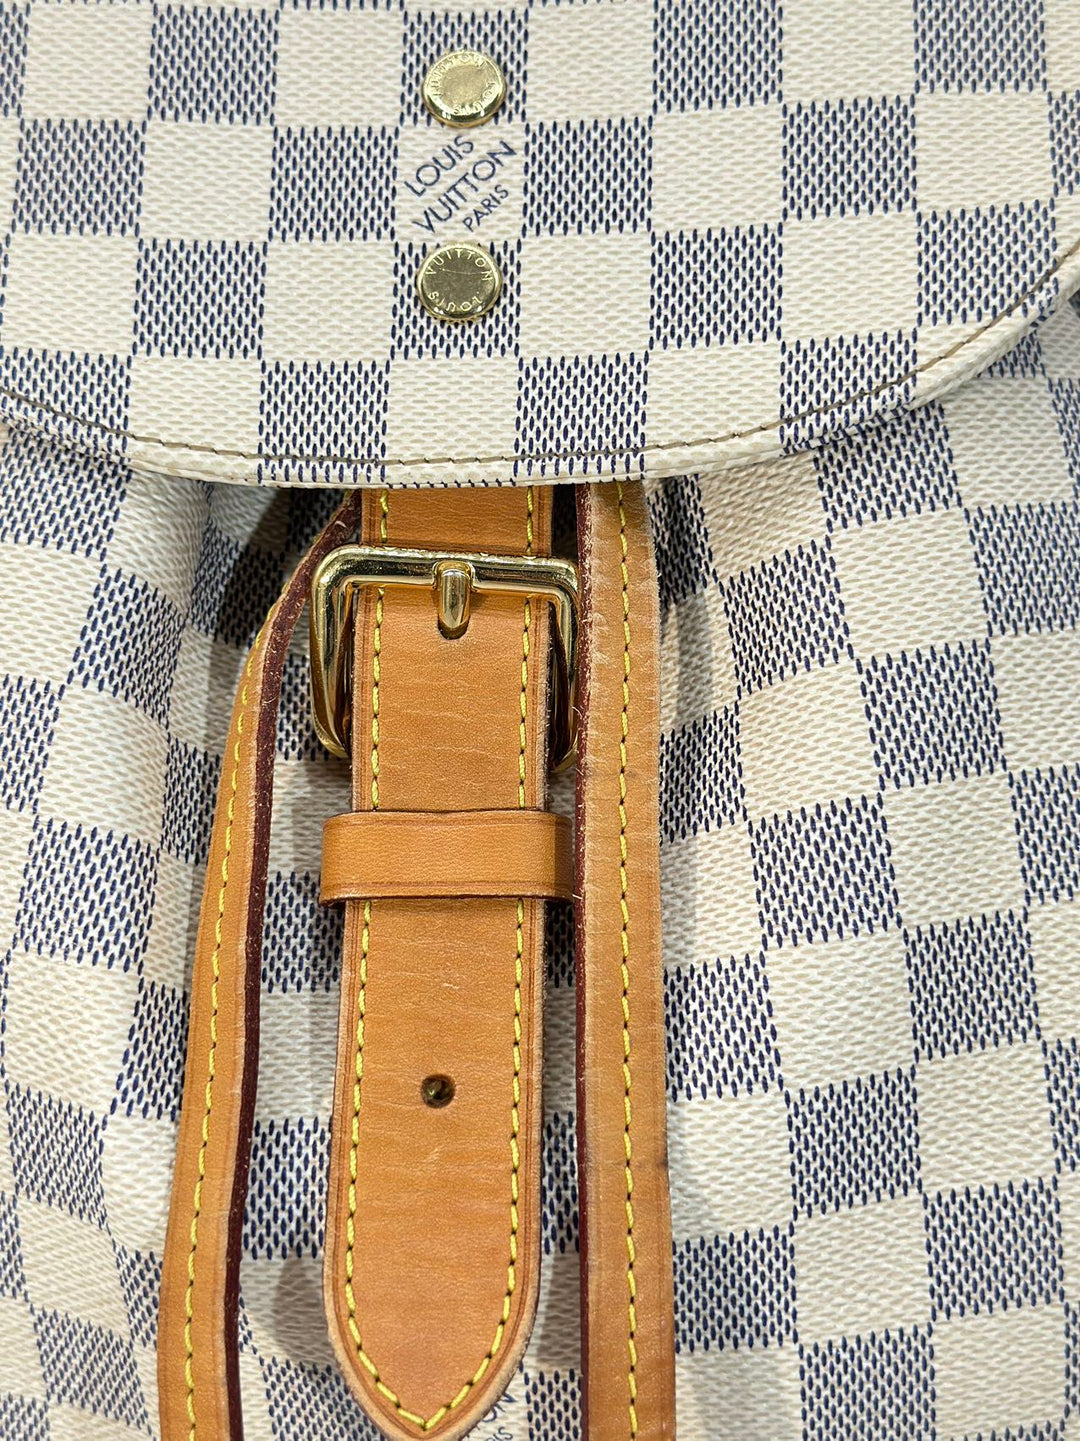 Pre-Owned Louis Vuitton Damier Azur Sperone GM Backpack